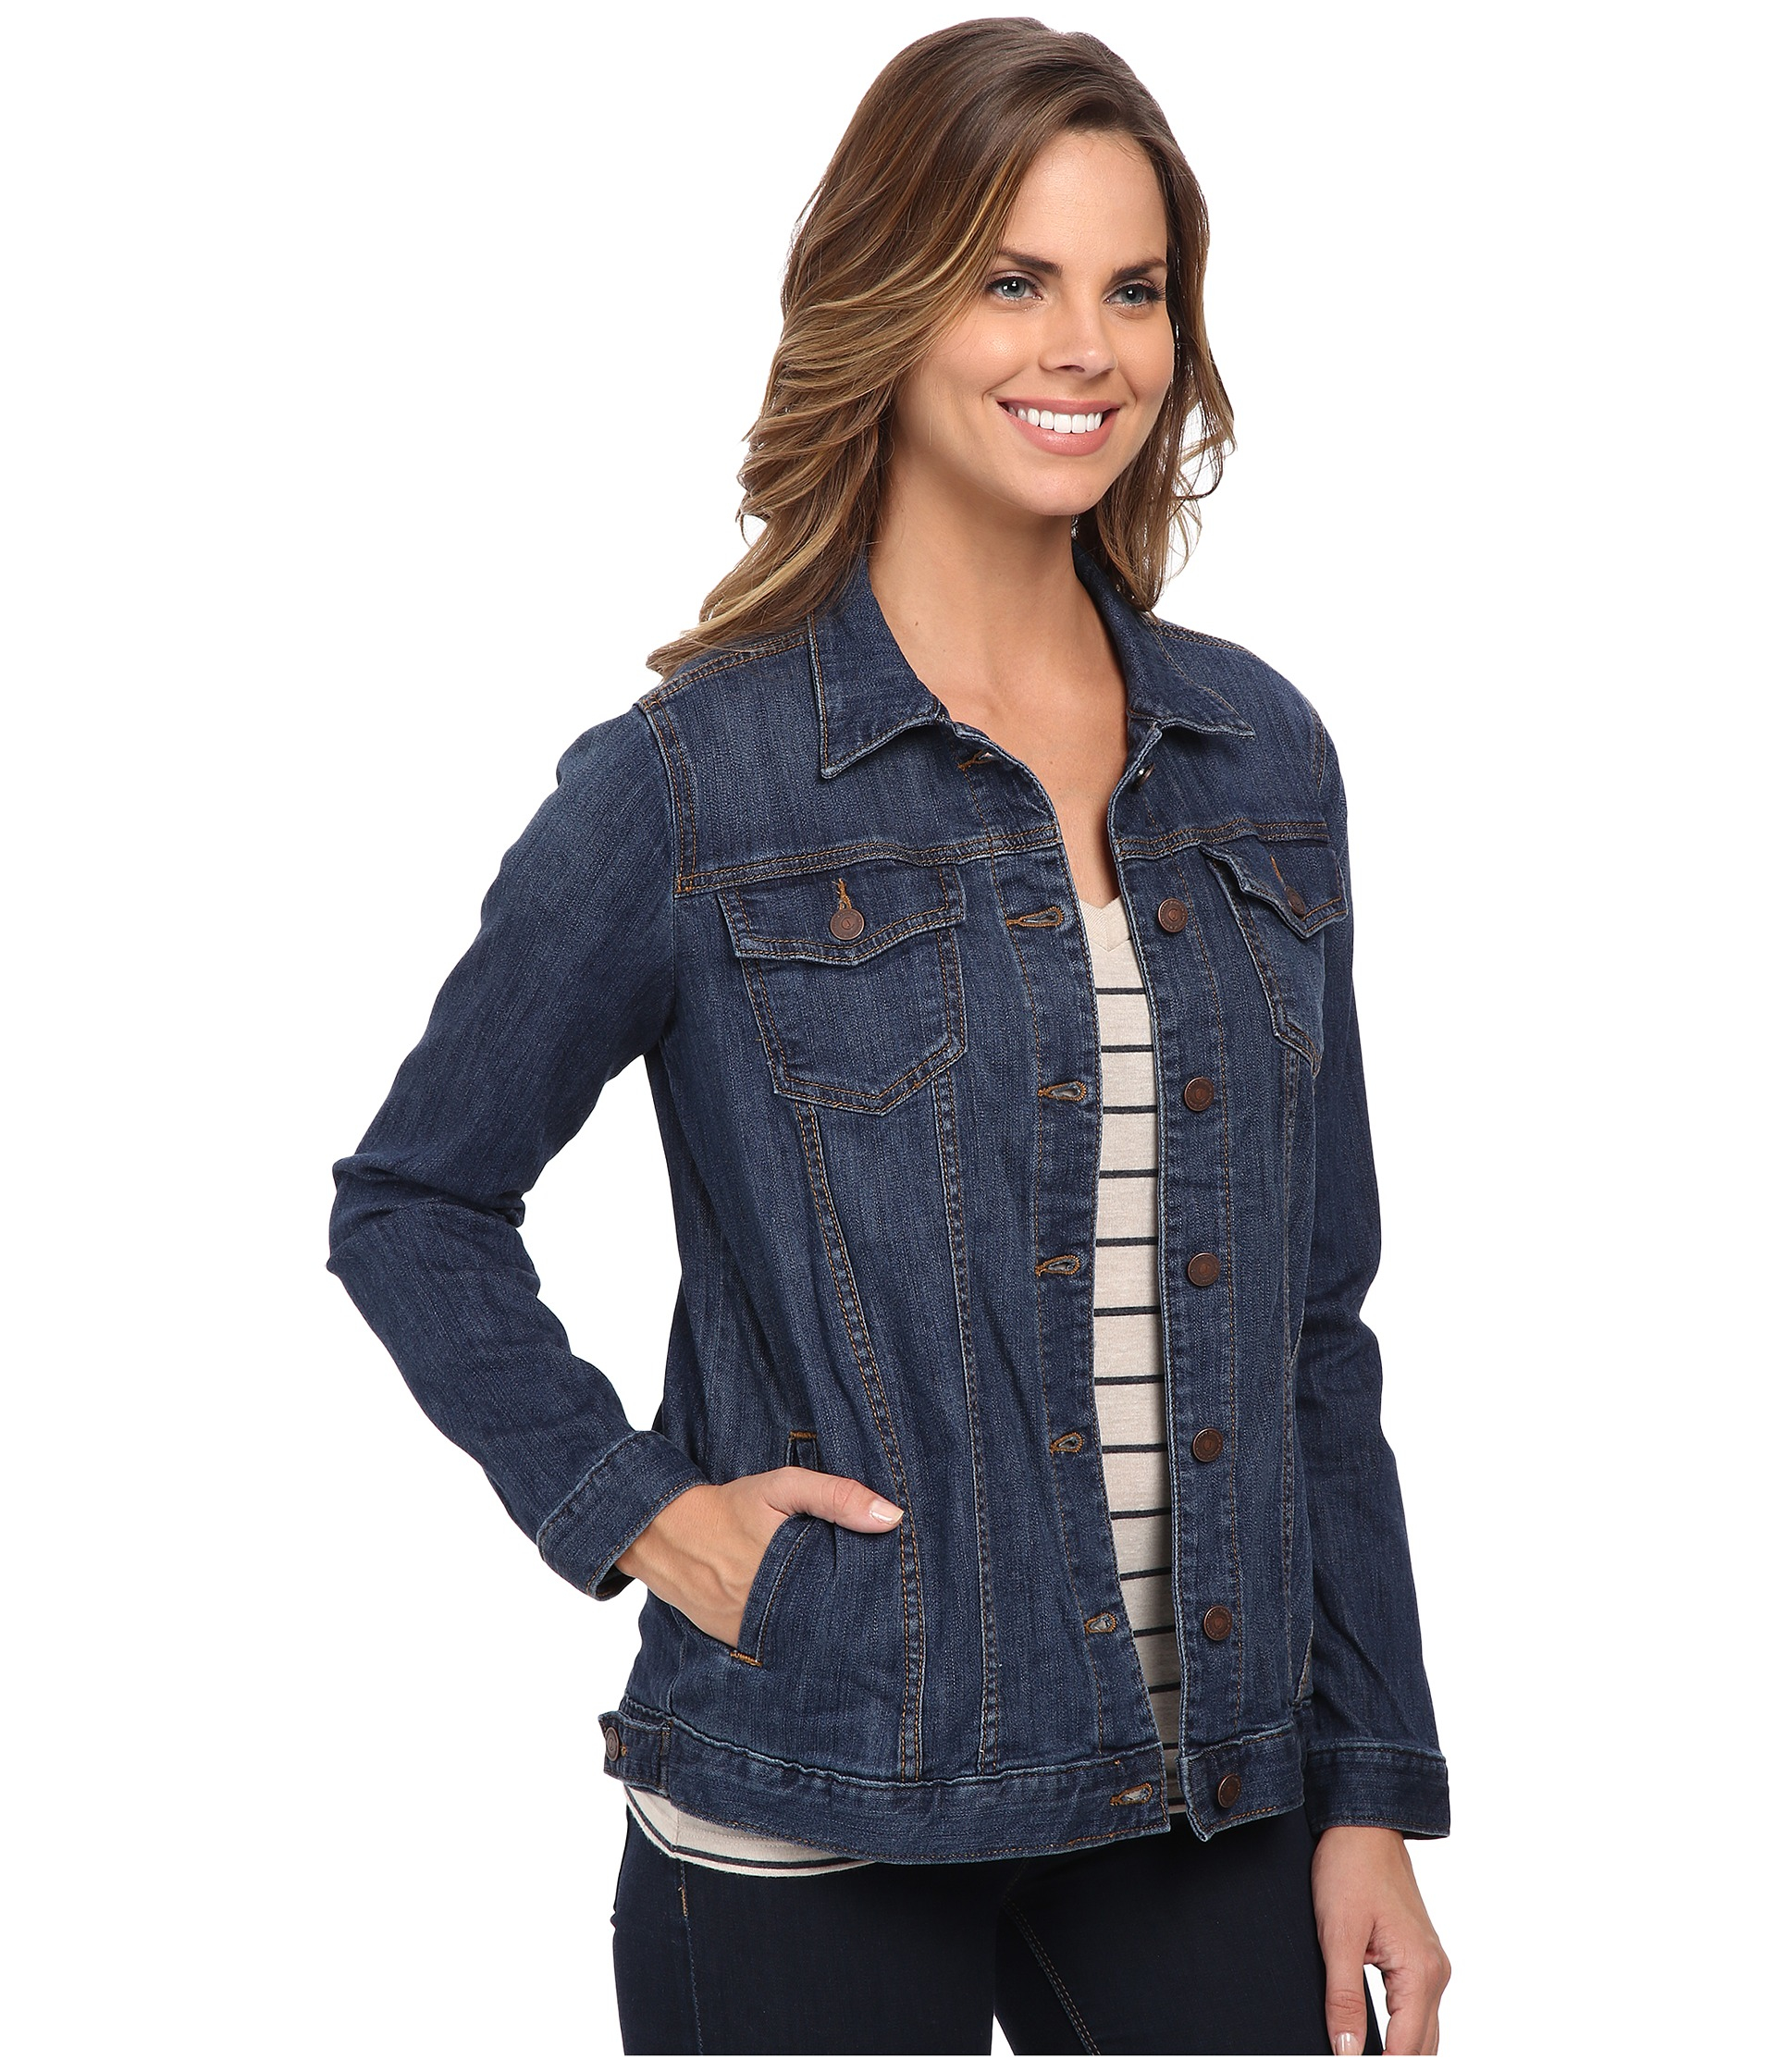 Lyst - Cj By Cookie Johnson Jean Jacket In Tansy in Blue